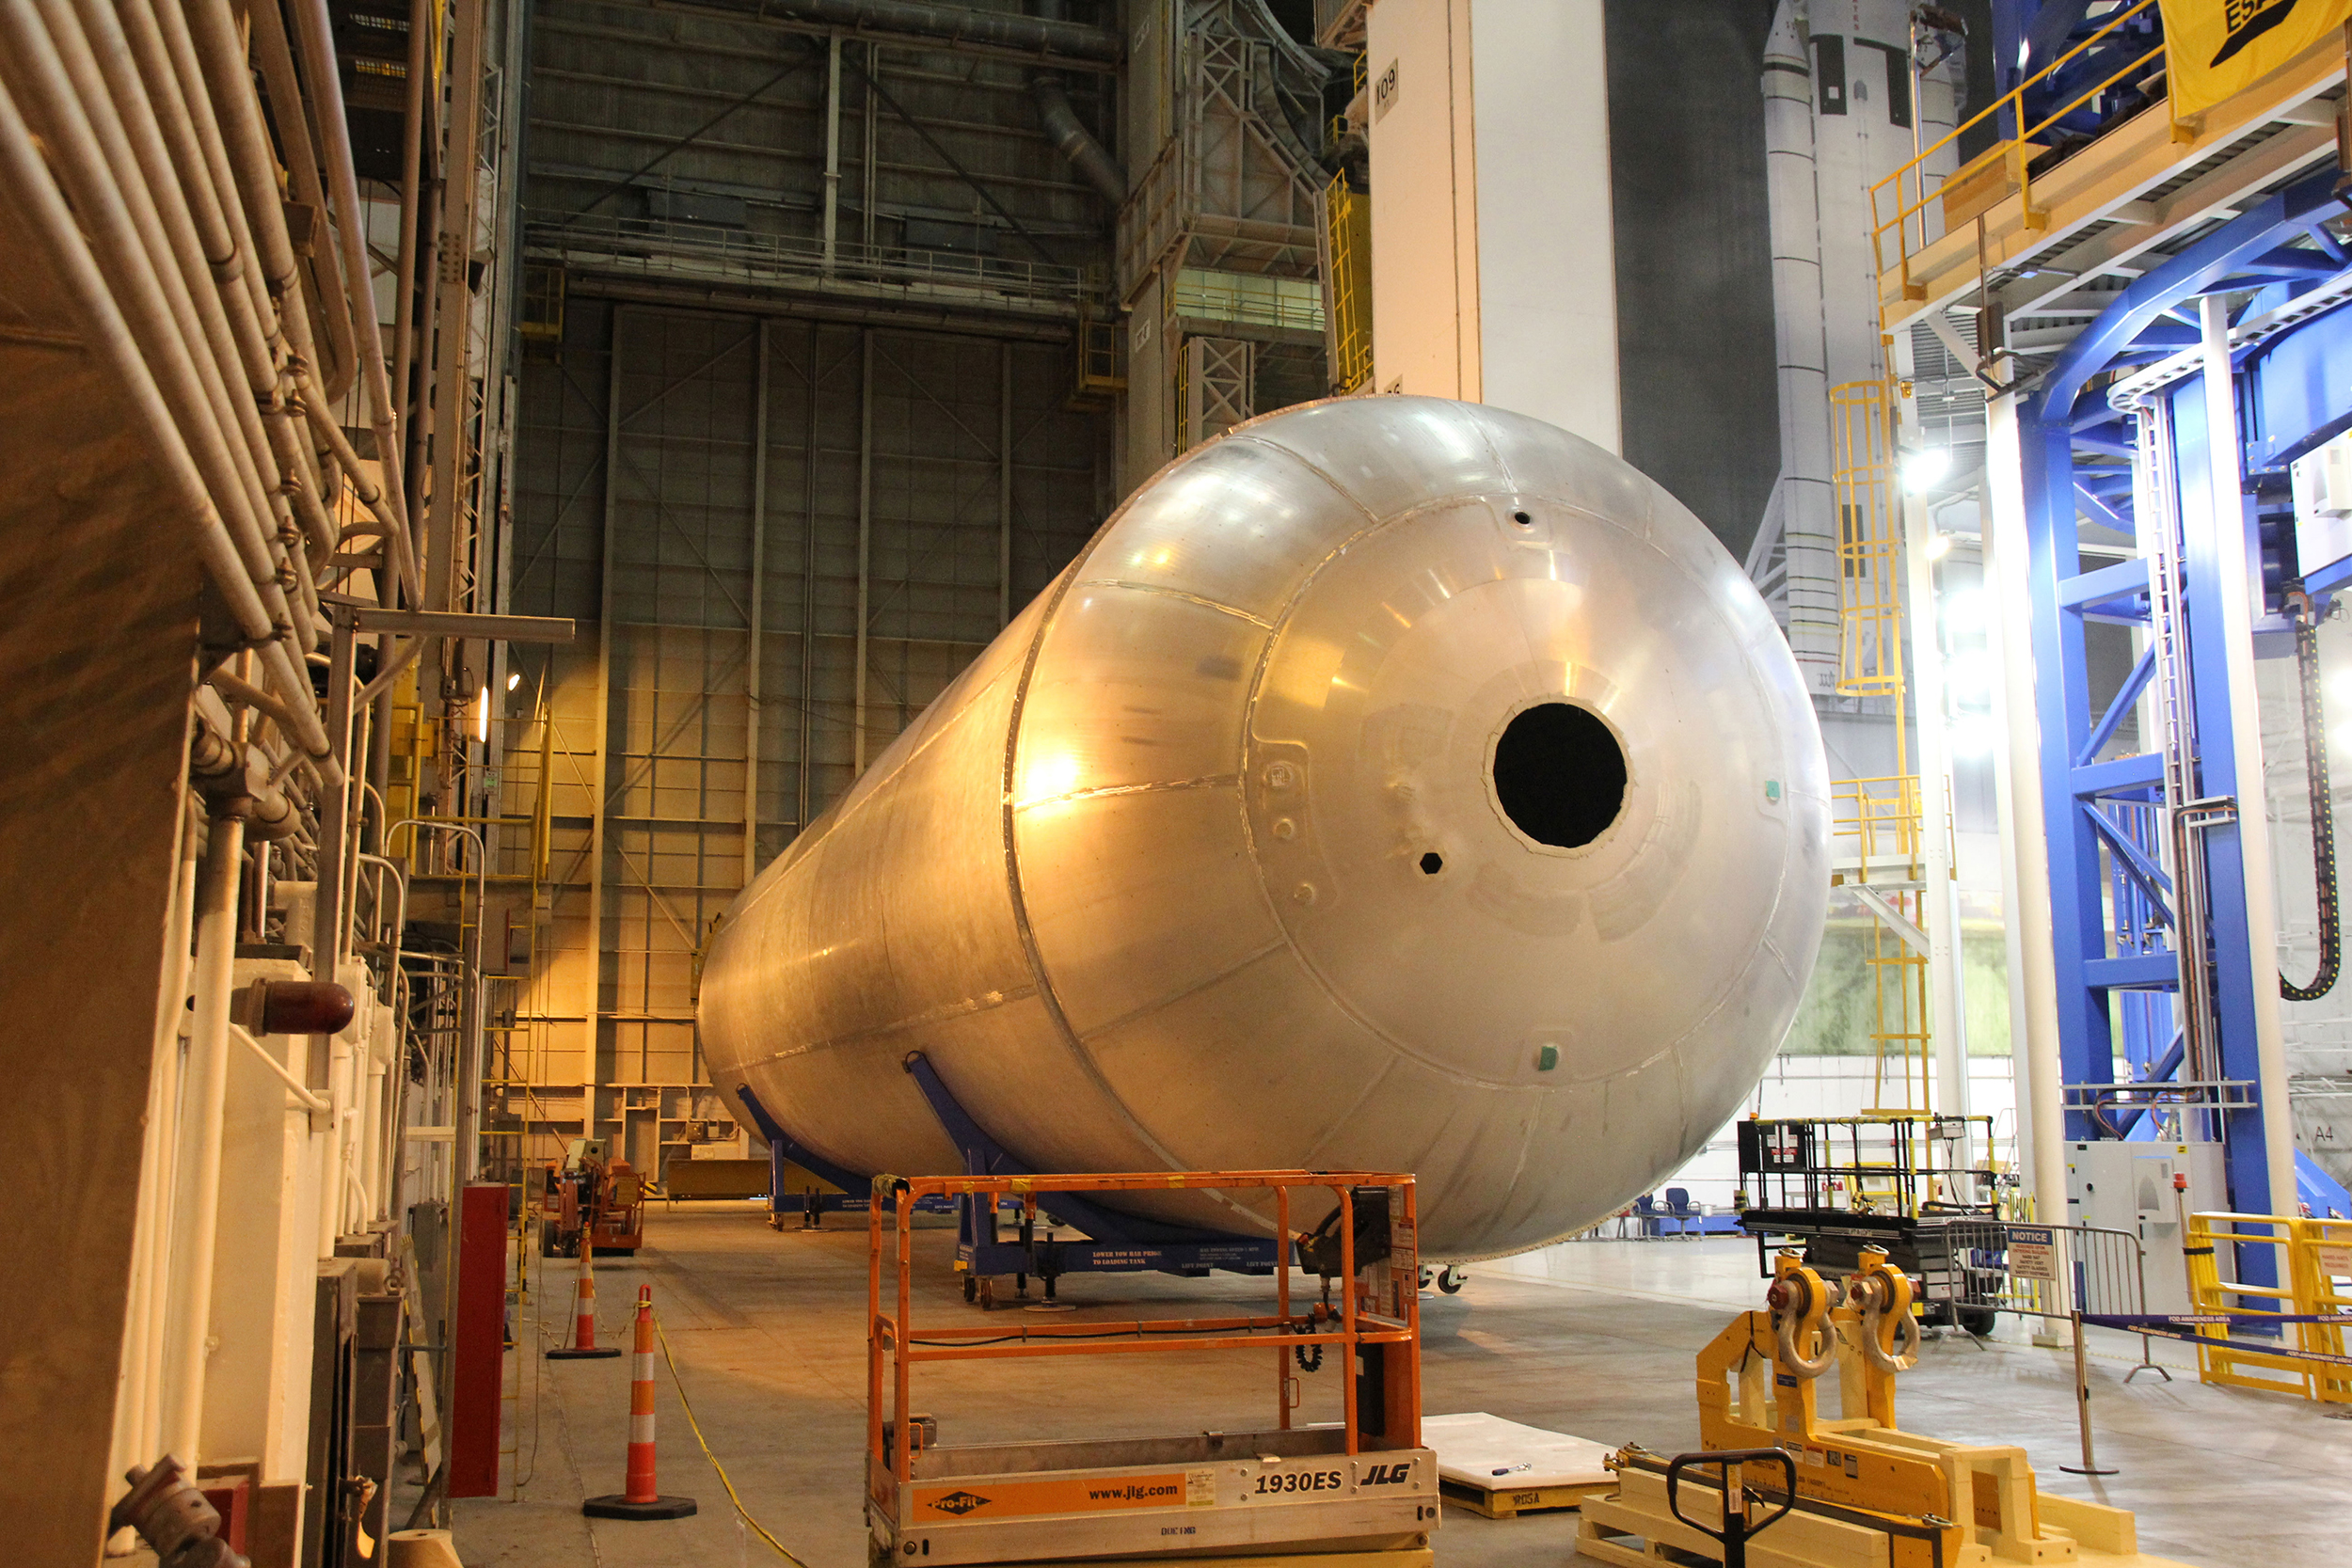 The newly assembled first liquid hydrogen tank, also called the qualification test article, for NASA’s new Space Launch System rocket lies horizontally beside the Vertical Assembly Center robotic weld machine (blue) on July 22, 2016. It was lifted out of the welder after final welding was completed at NASA’s Michoud Assembly Facility in New Orleans. Credit: Ken Kremer